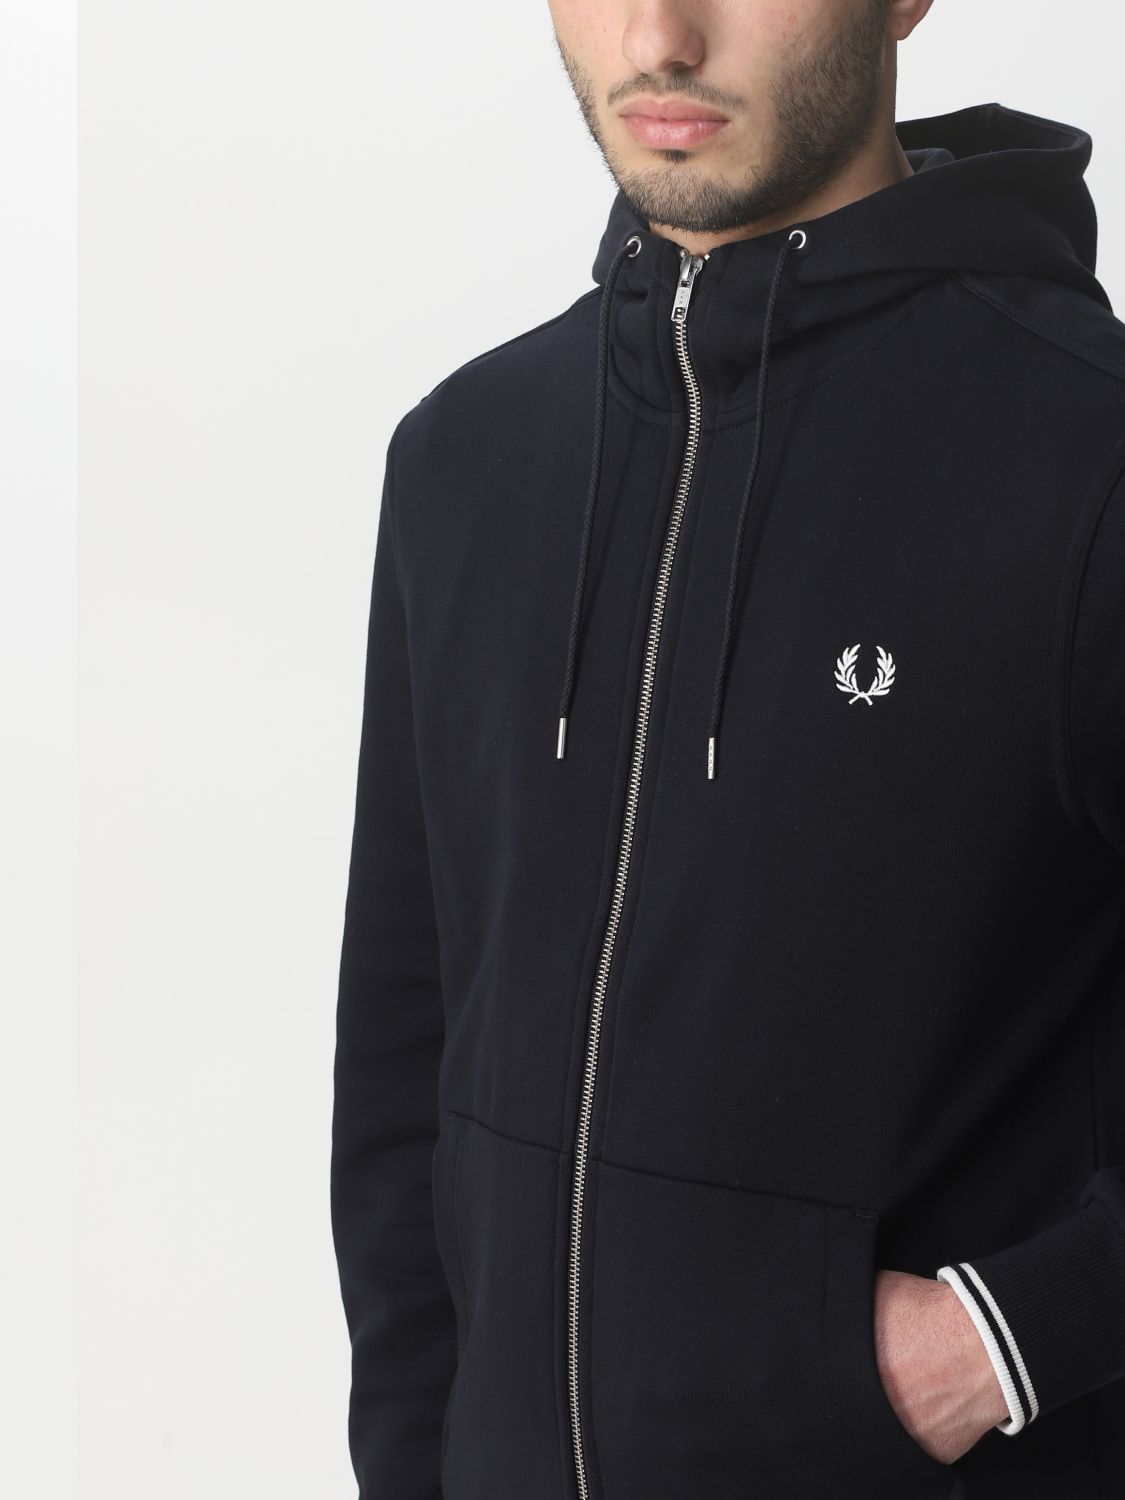 Sweatshirt Fred Perry: Fred Perry cotton Jumper navy 4